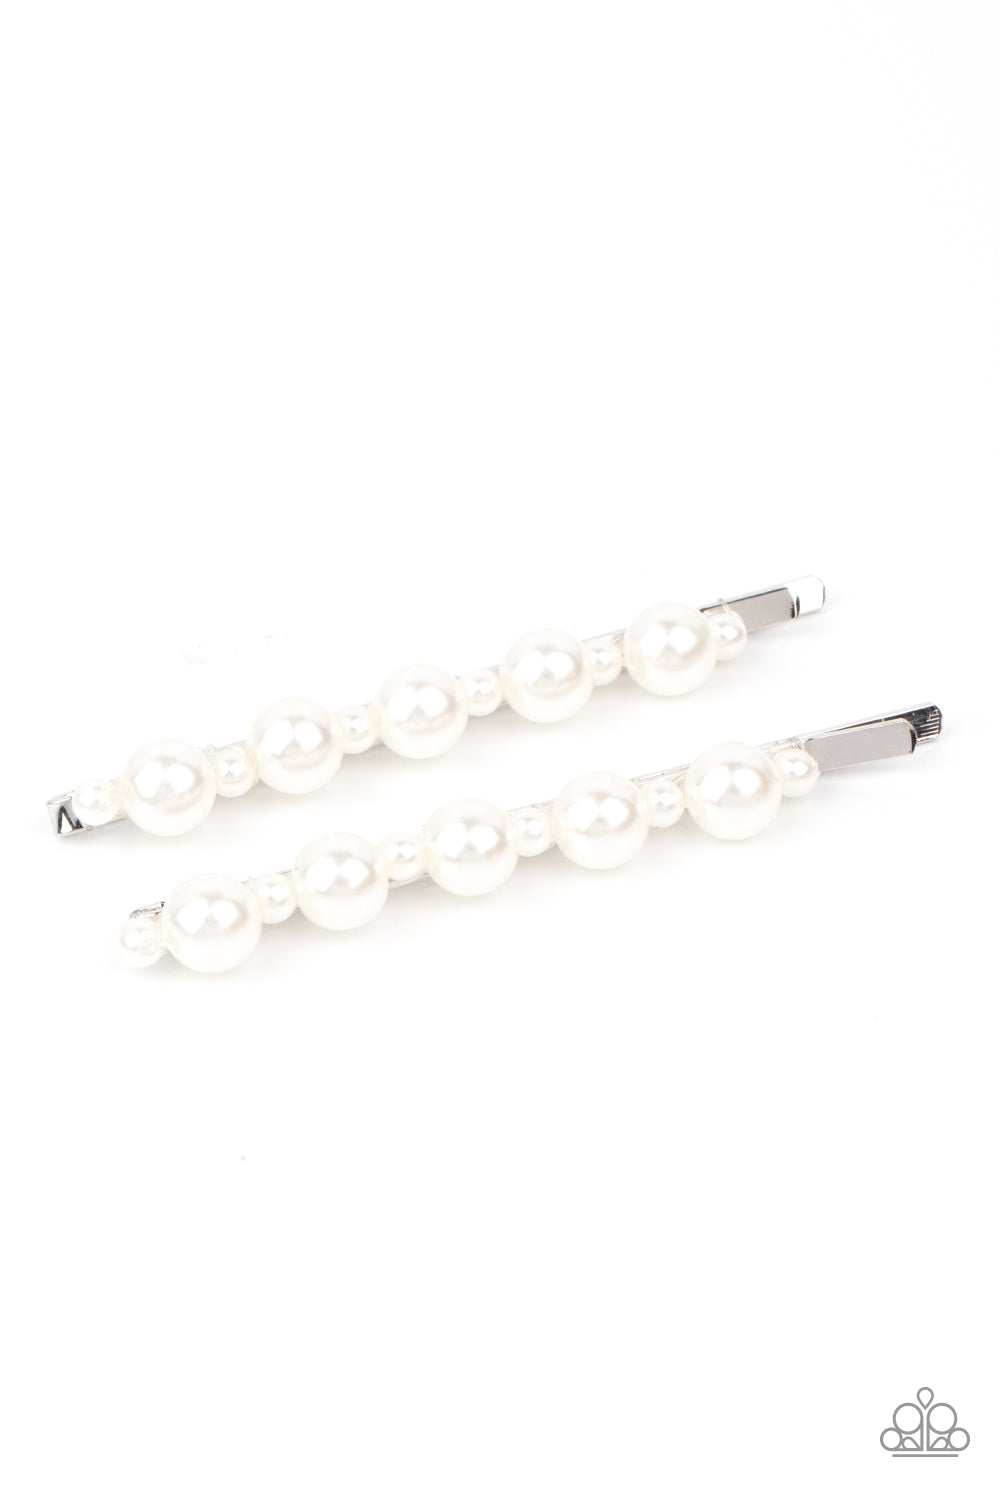 Put A Pin In It - White Paparazzi Hair Clip